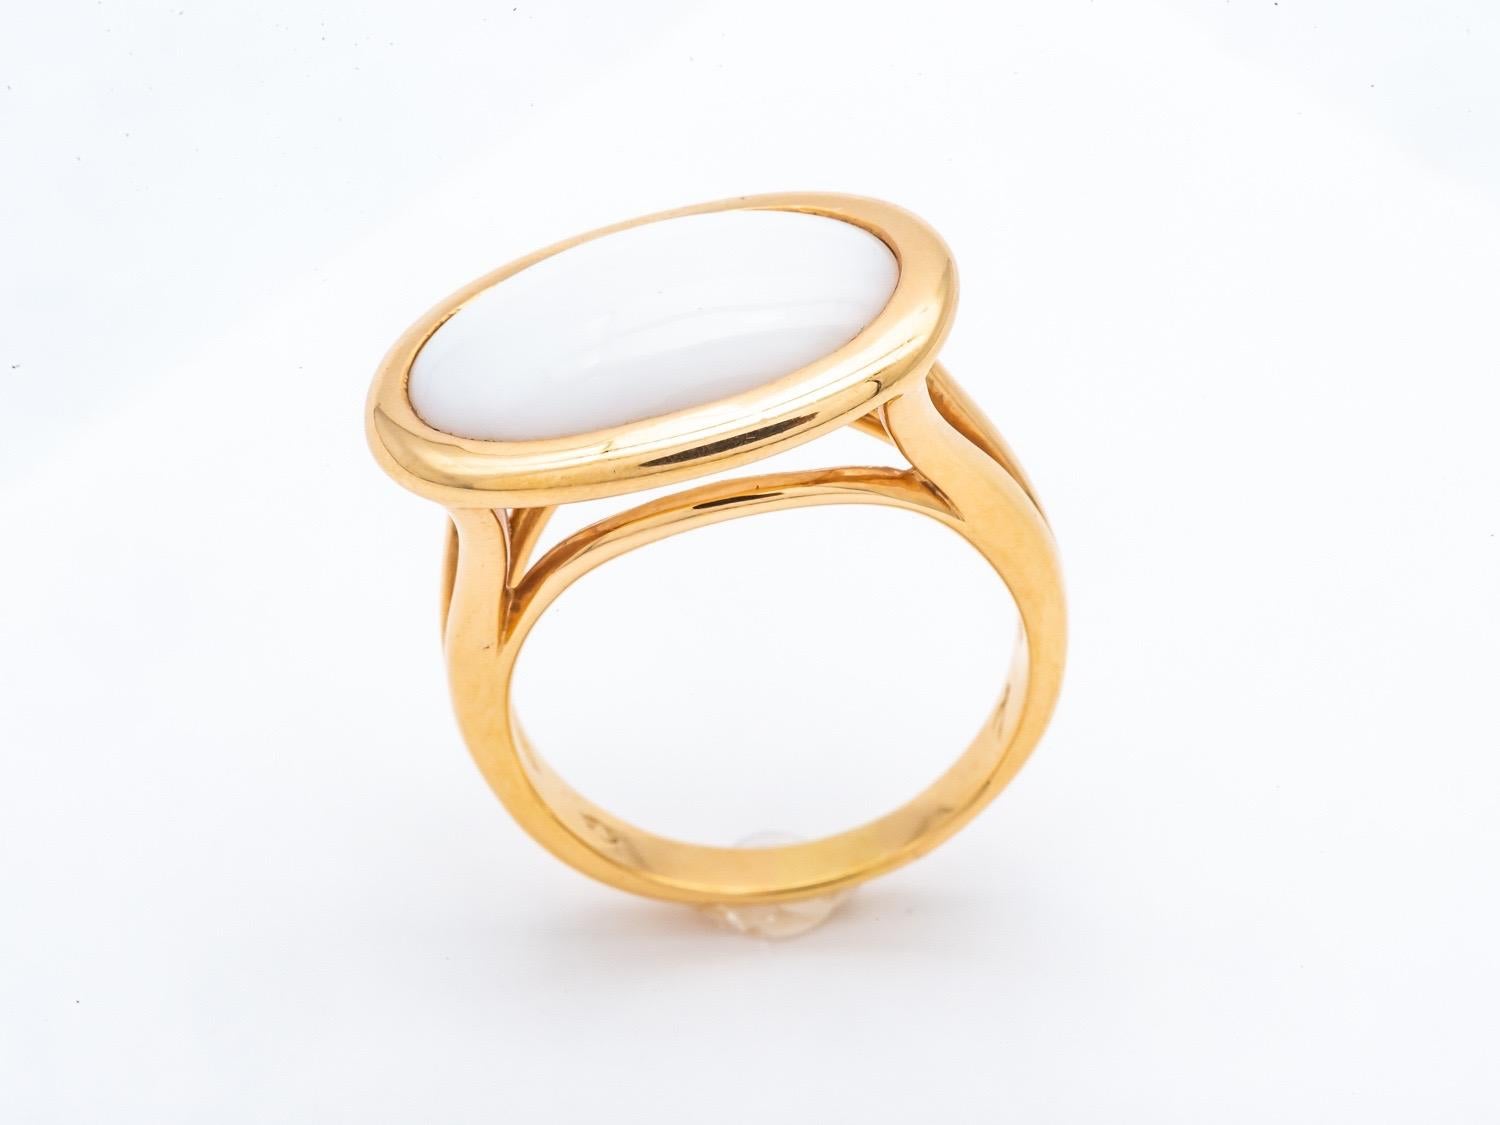 magnificent ring in 18-carat pink gold. This remarkable piece is topped with a white onyx, cut as a half-oval cabochon, adding a touch of sophistication and charm. With a French size of 57 (corresponding to US size 8), this ring is perfect for most